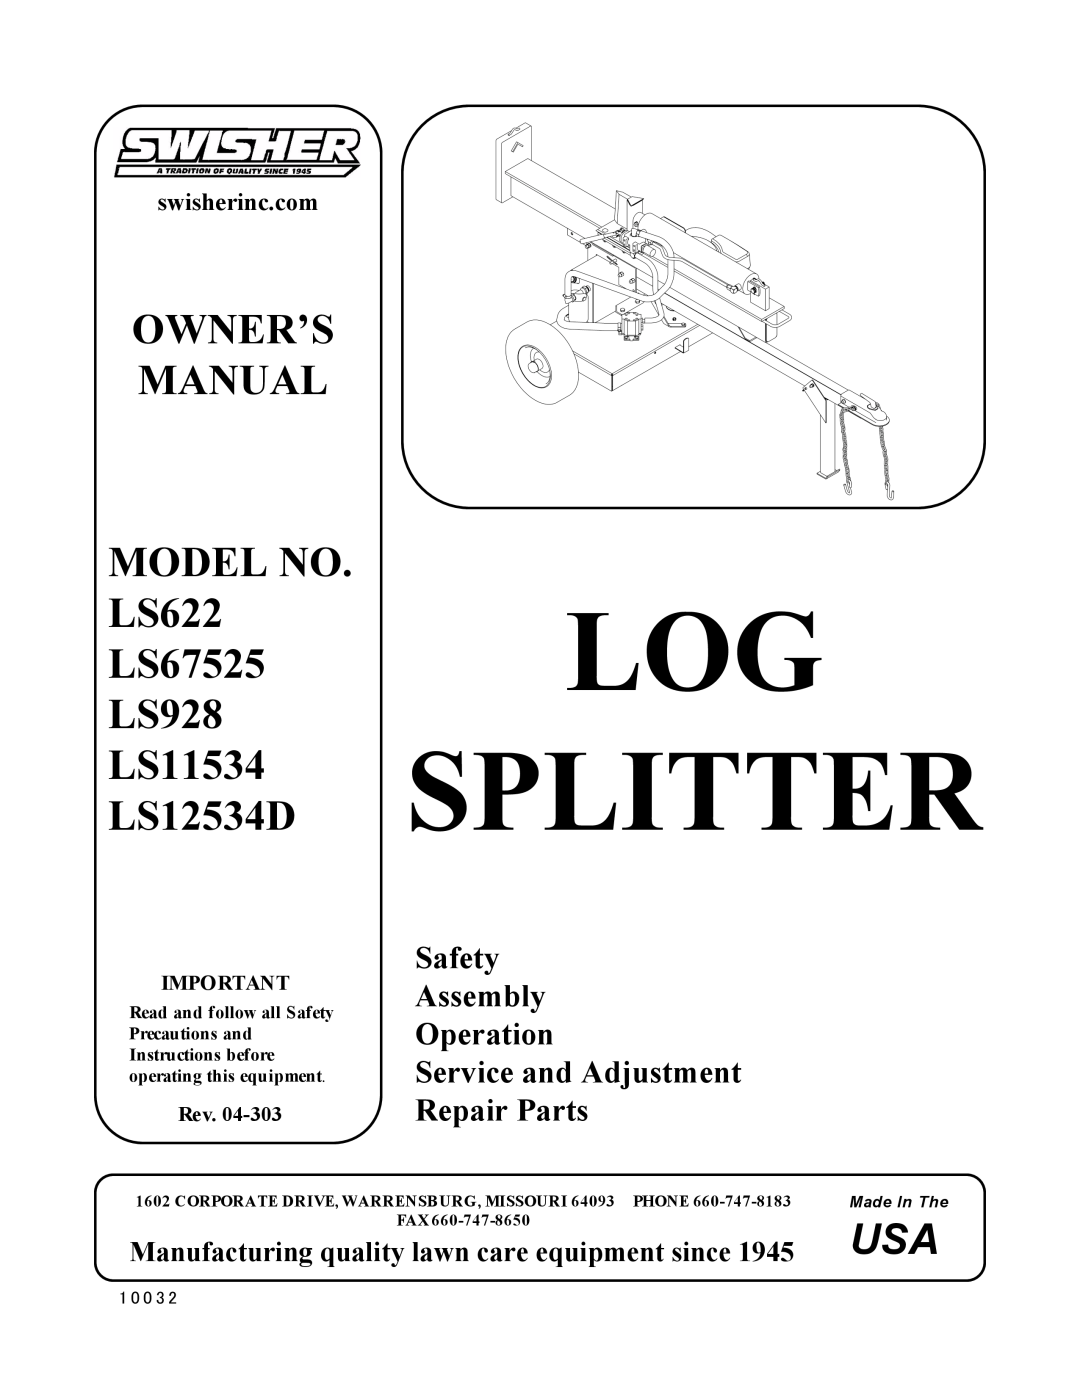 Swisher owner manual MODEL NO. LS622 LS67525 LS928 LS11534 LS12534D, Manufacturing quality lawn care equipment since 